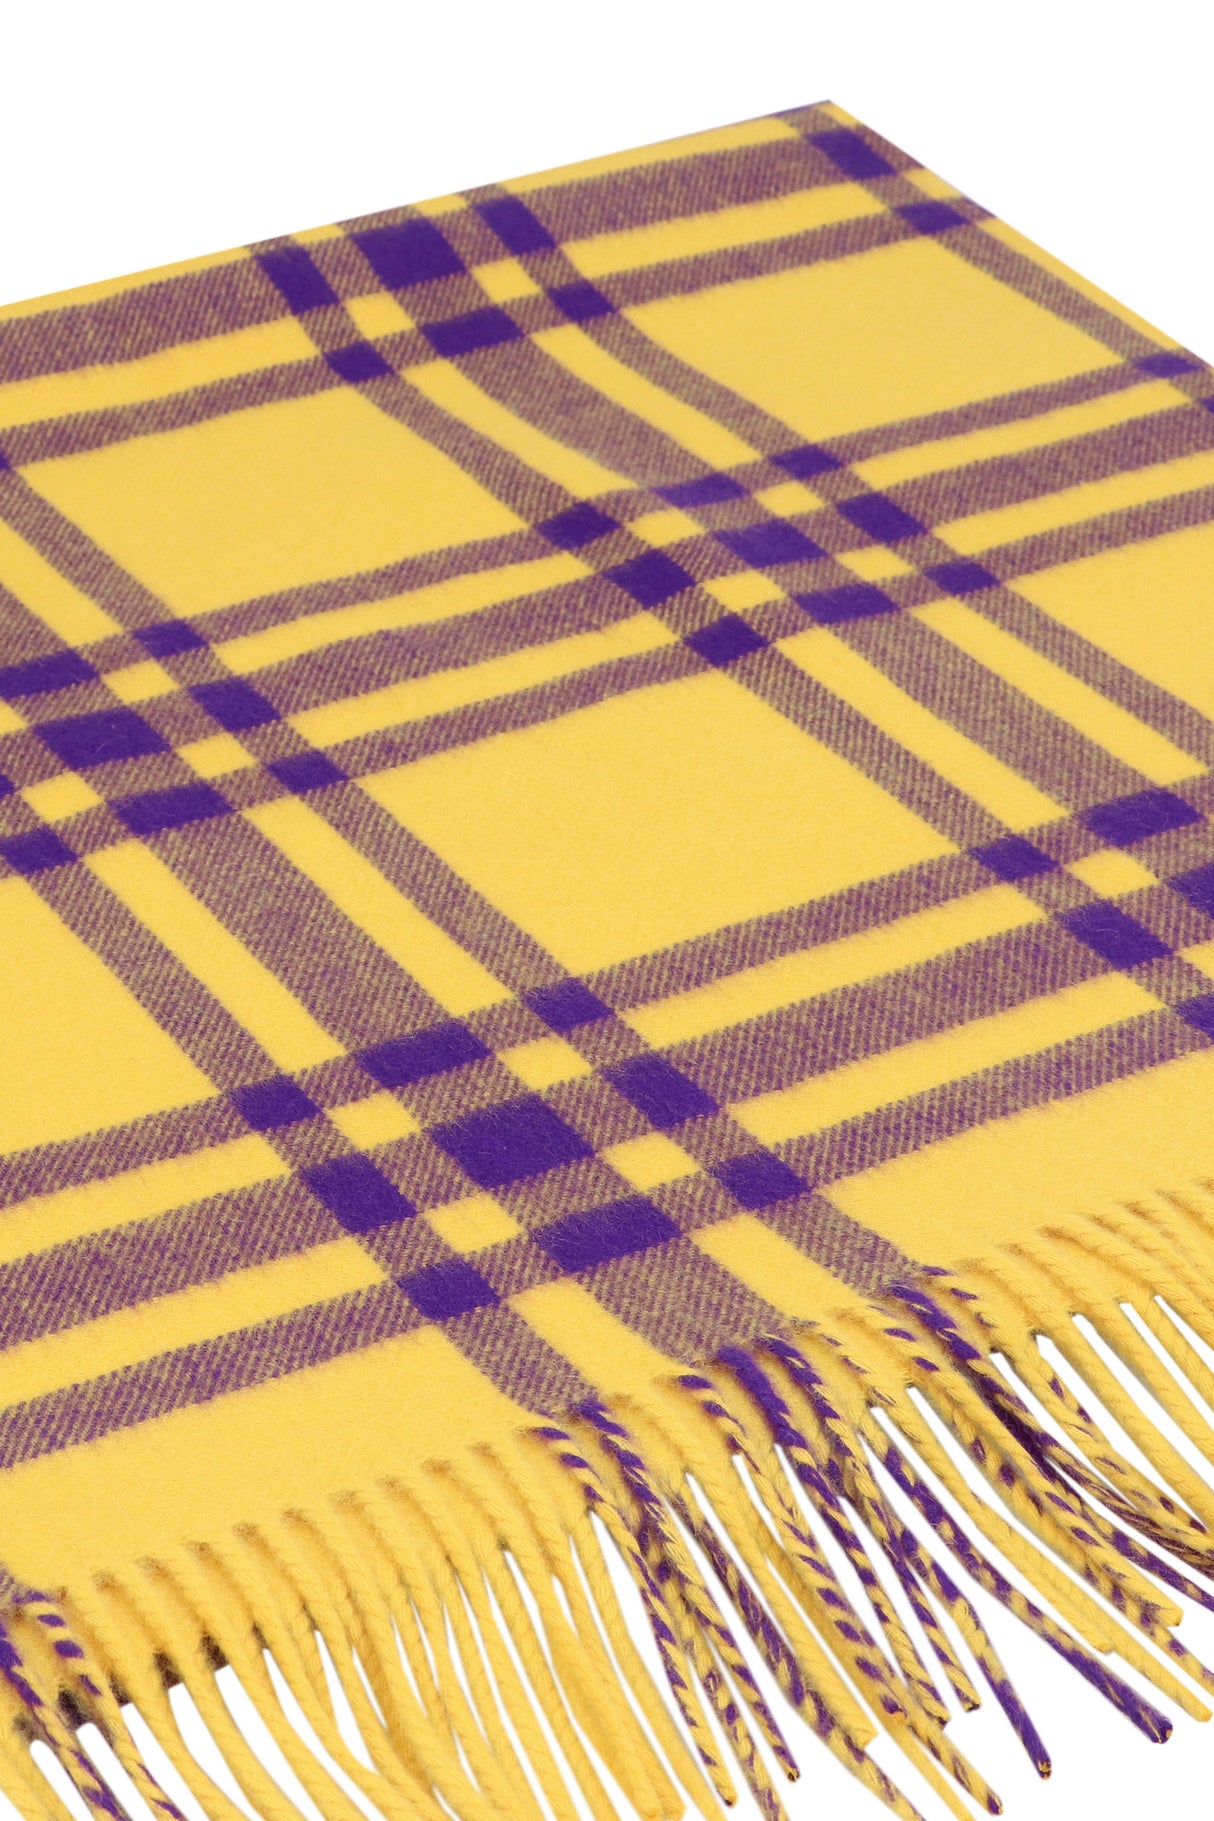 BURBERRY Luxurious Checkered Cashmere Scarf for Women in Yellow